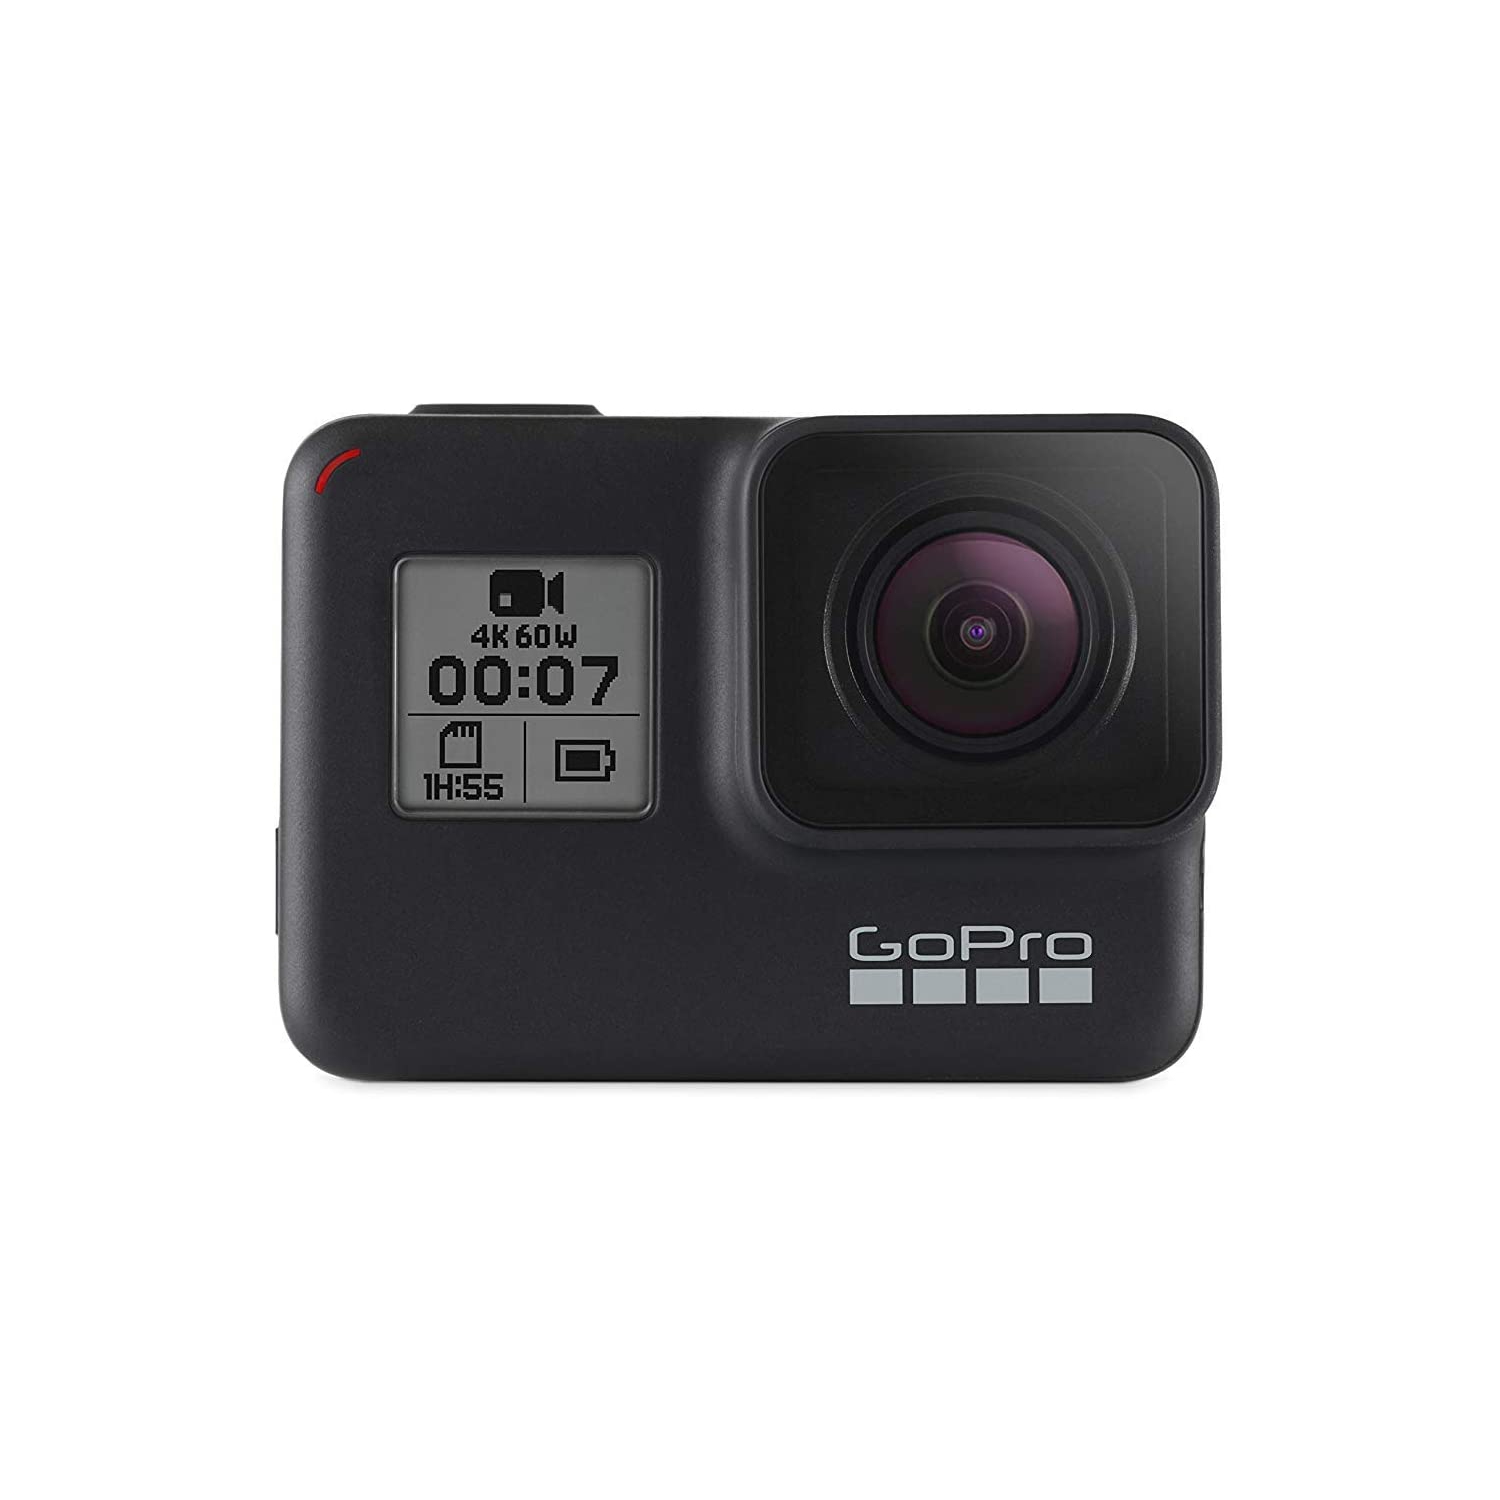 GoPro HERO7 Black Waterproof Digital Action Camera with Touchscreen 4K HD Video 12MP Photos, Live Streaming, Stabilization